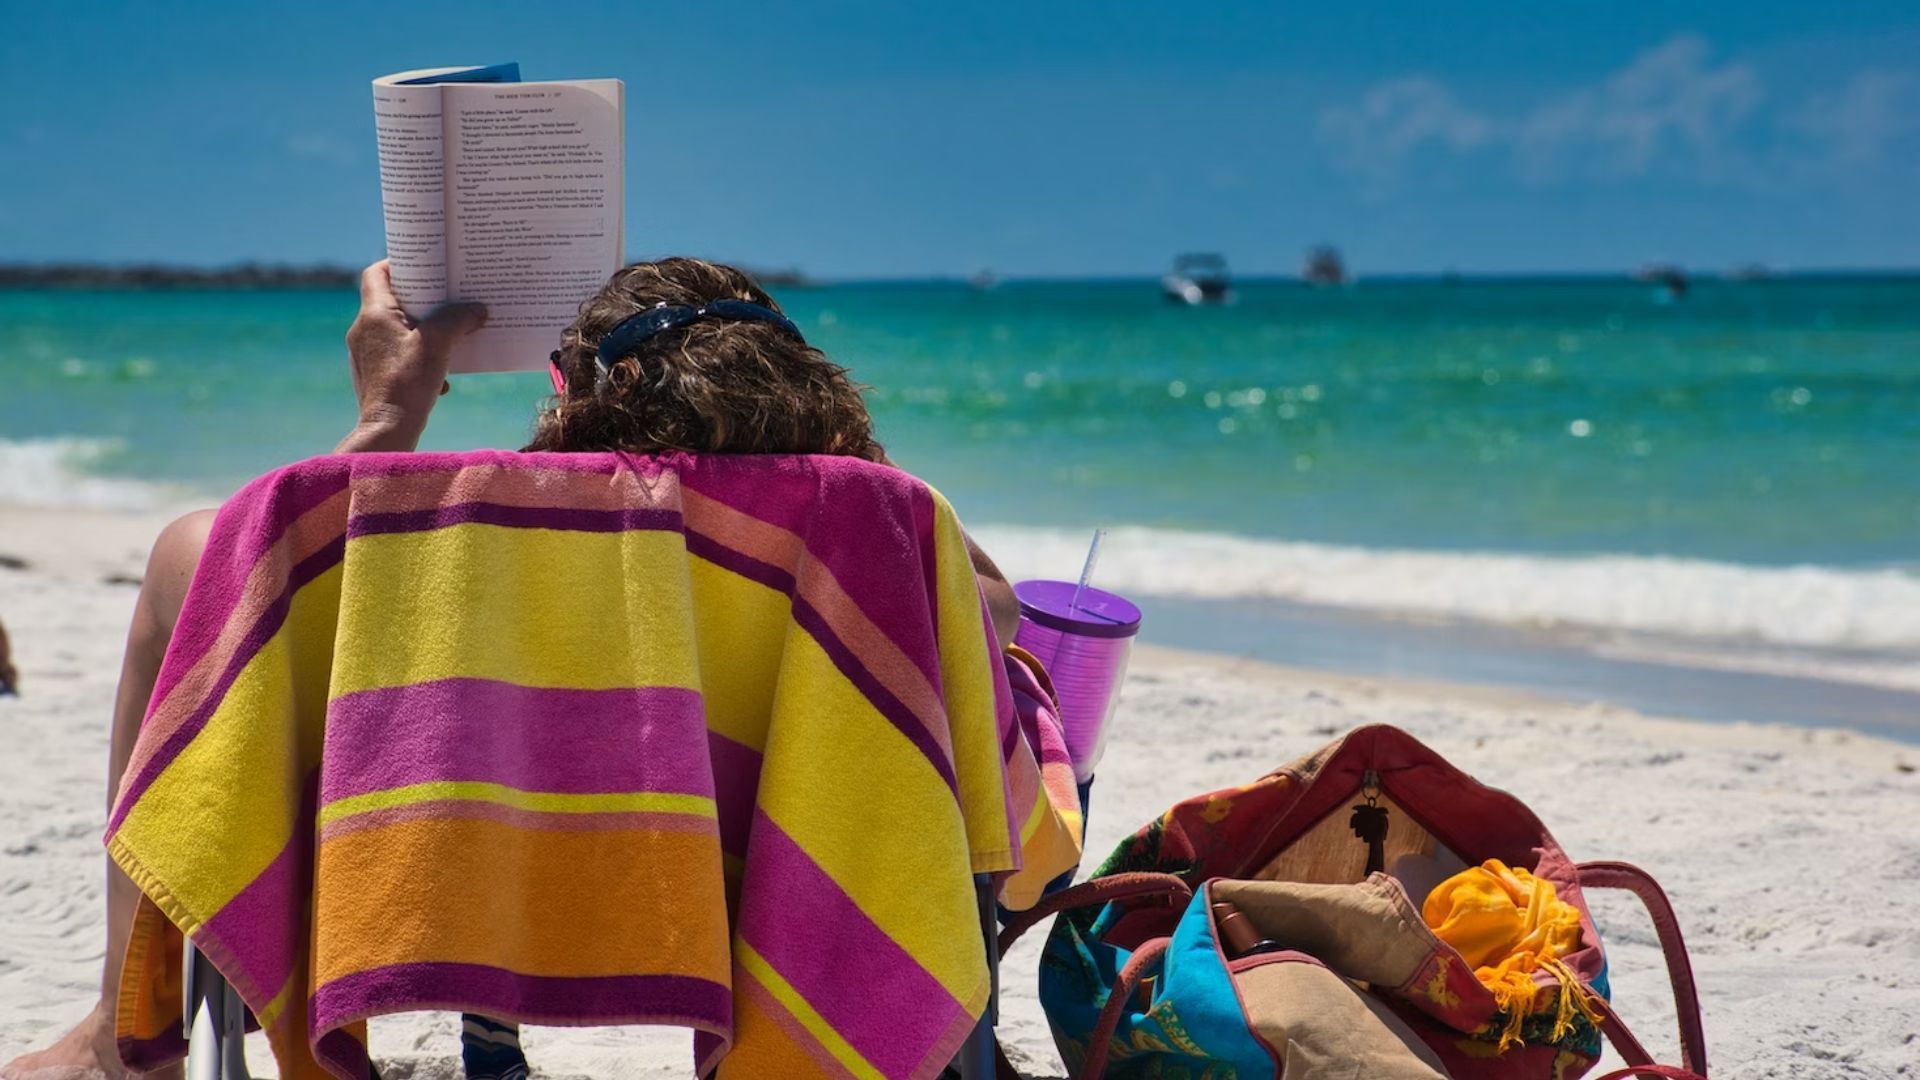 books to read at the beach